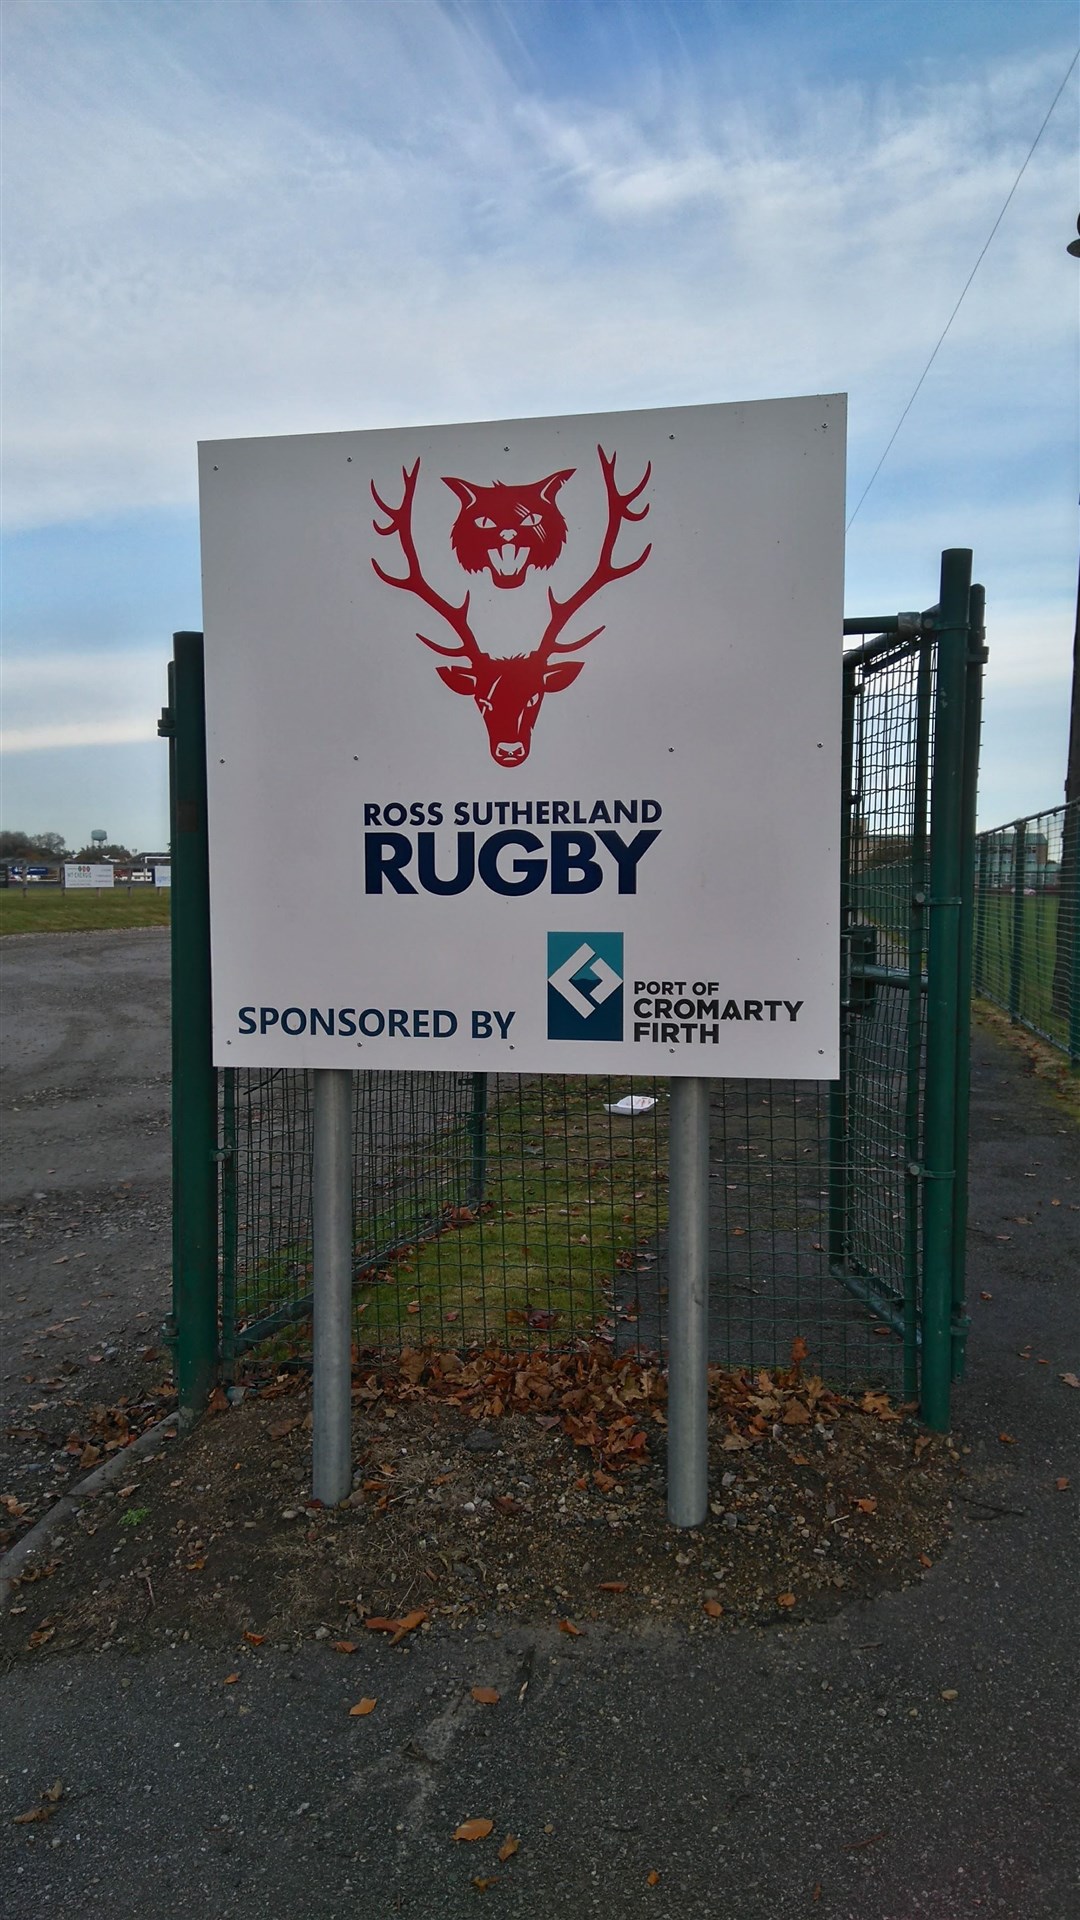 The port has long supported the rugby club.